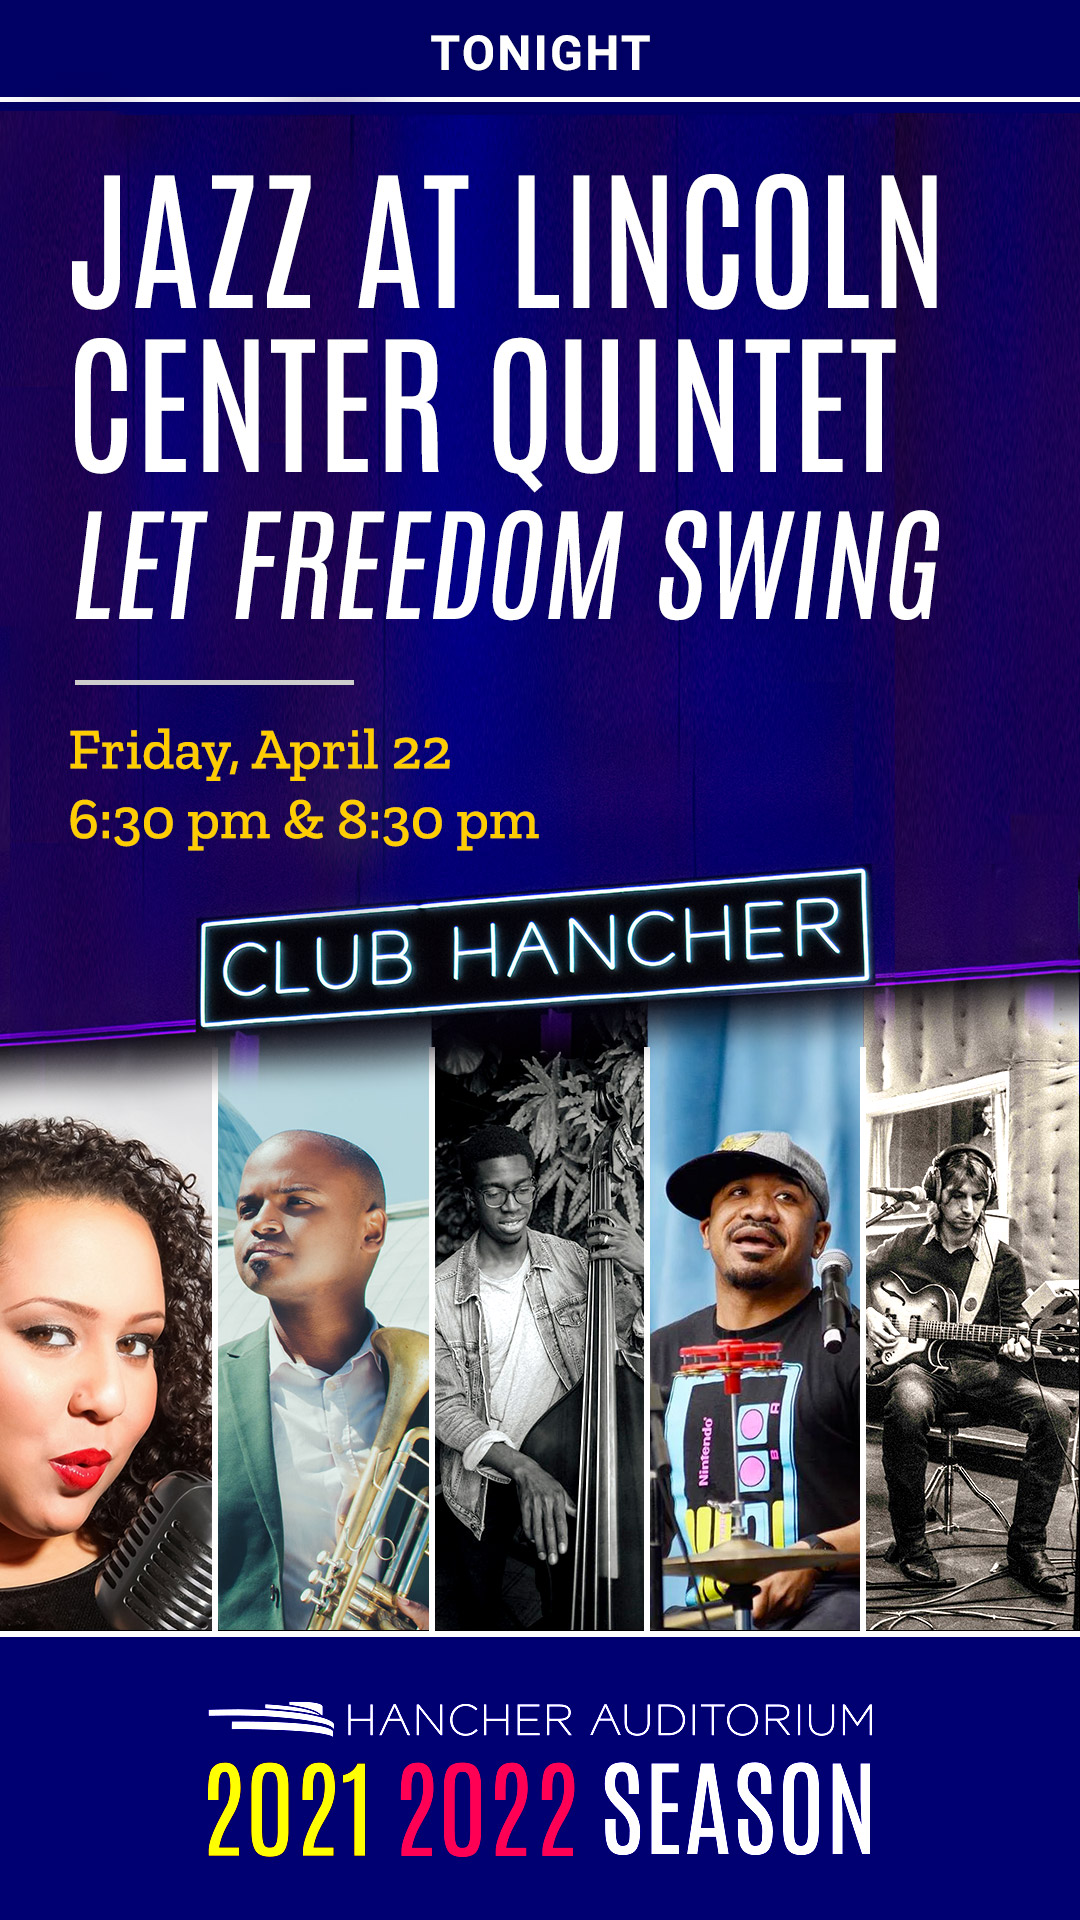 Jazz at Lincoln Center Quintet, "Let Freedom Swing" - Tonight